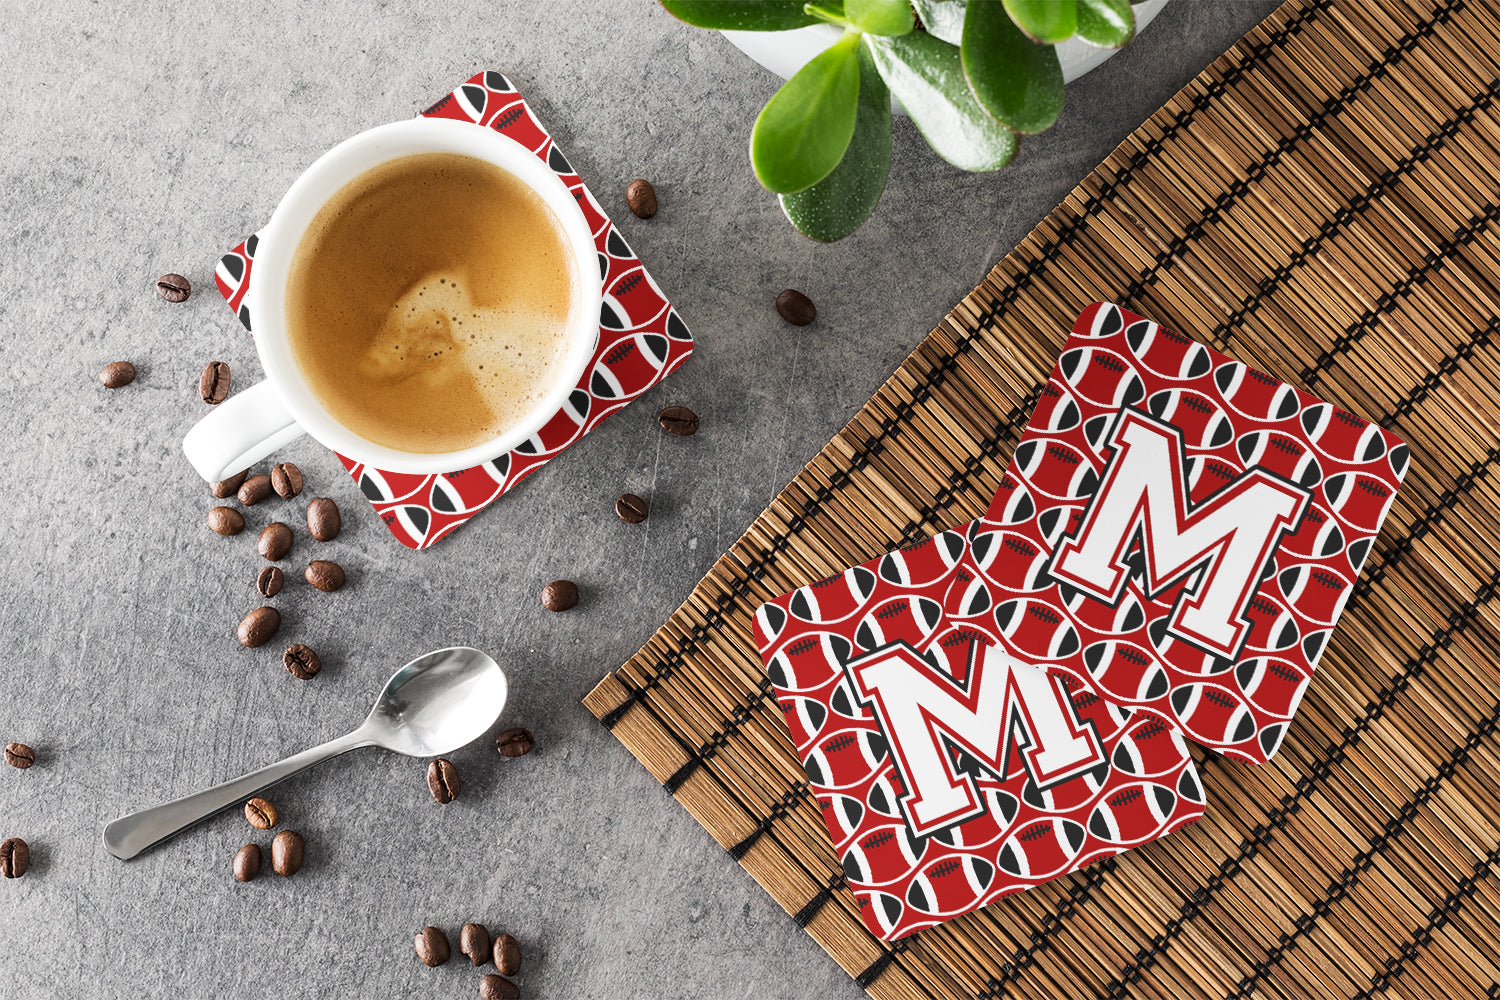 Letter M Football Cardinal and White Foam Coaster Set of 4 CJ1082-MFC - the-store.com